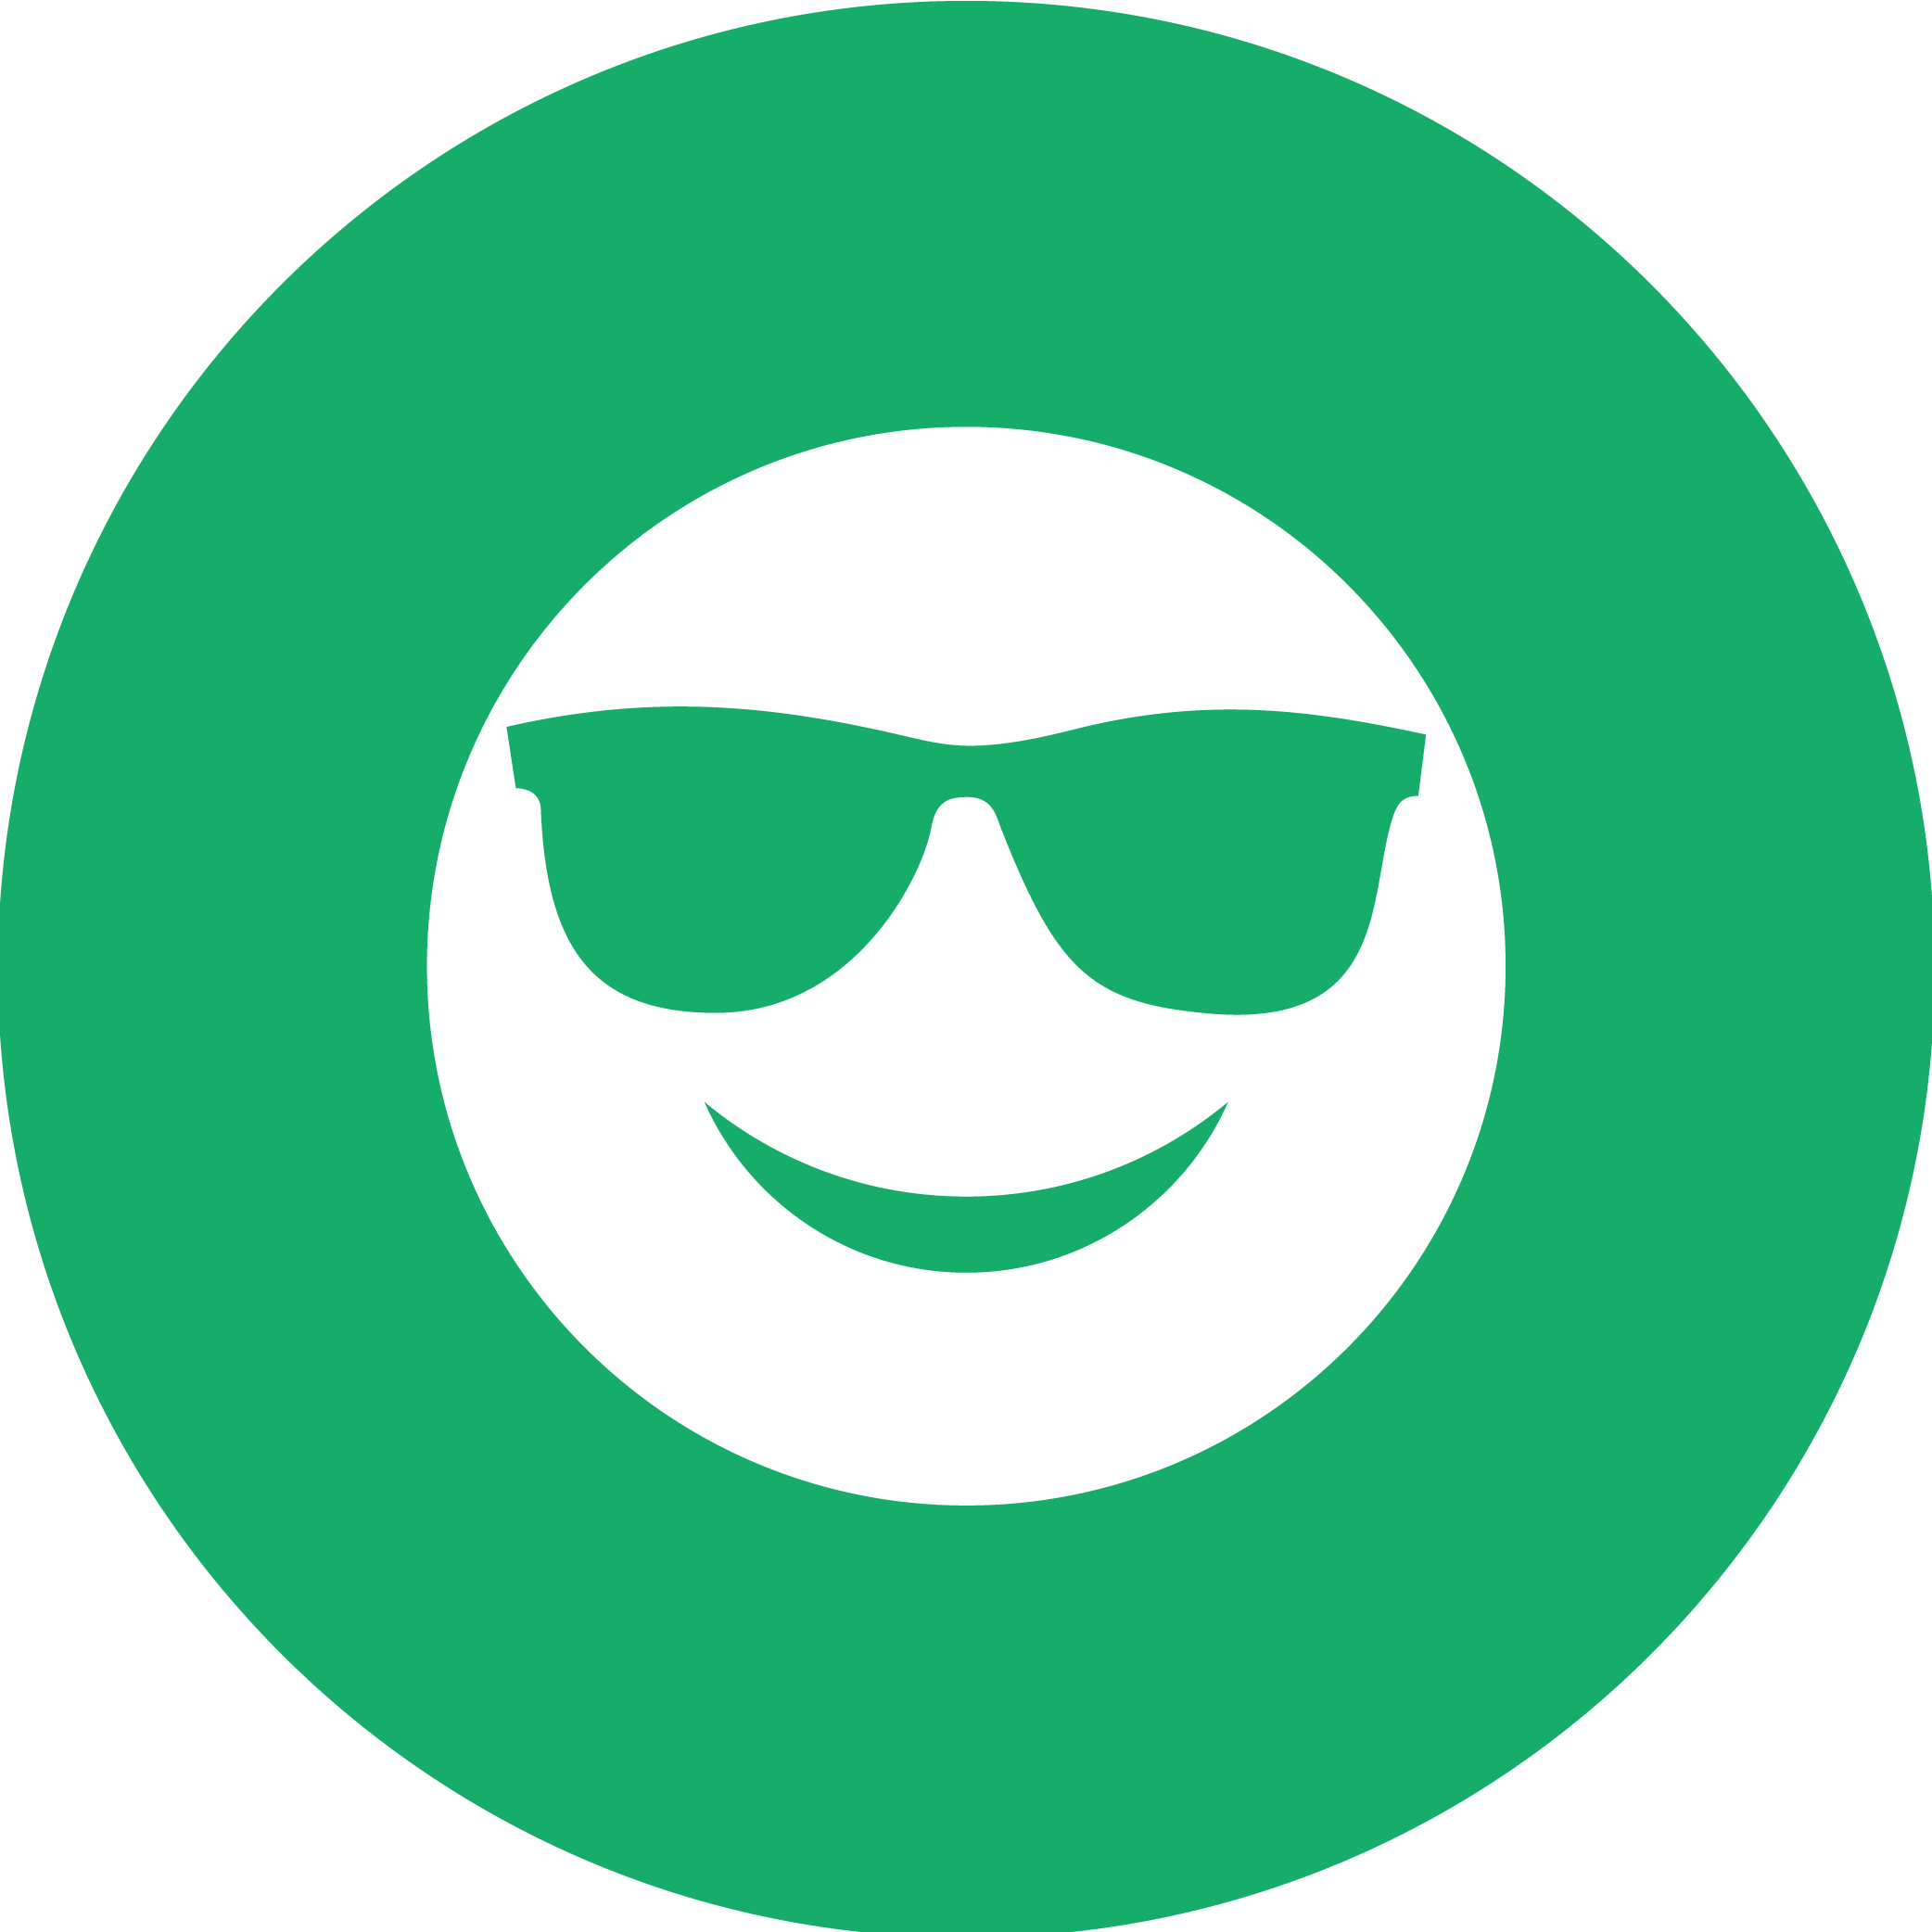 Icon of a smiley face wearing sunglasses